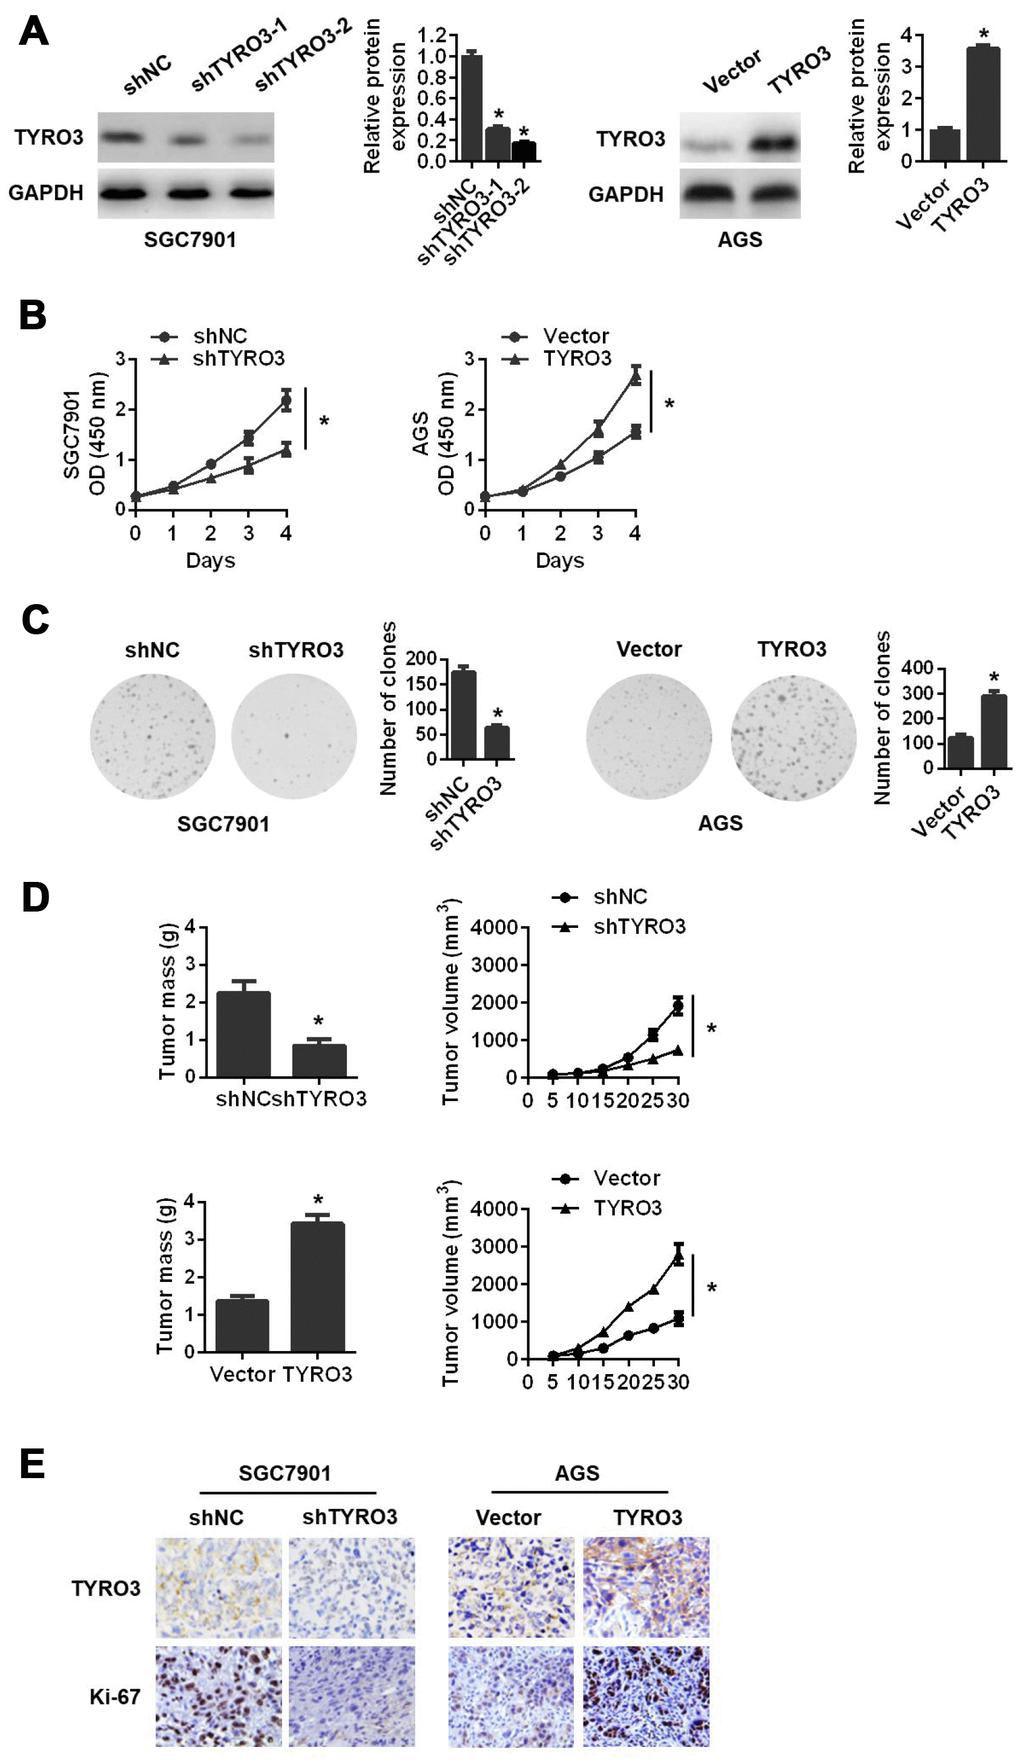 The effects of TYRO3 knockdown or overexpression on gastric cancer (GC) cell proliferation both in vitro and in vivo. (A) Western blot analyses of TYRO3 expressions in GC cells transfected with the TYRO3-shRNA or TYRO3-constructed plasmid. (B) The effect of TYRO3-altered expression on GC cell growth using the CCK-8 assay. (C) The effect of TYRO3-altered expression on GC cell growth using the colony formation assay. (D) The effect of TYRO3 altered expression on GC cells subcutaneous xenograft growth in nude mice. Tumor mass and tumor volume are shown in the right panels (n = 6/group). (E) Immunohistochemical detection of TYRO3 and Ki-67 expression levels in xenograft tumor samples. Glyceraldehyde 3-phosphate dehydrogenase was used as a loading control. *P 